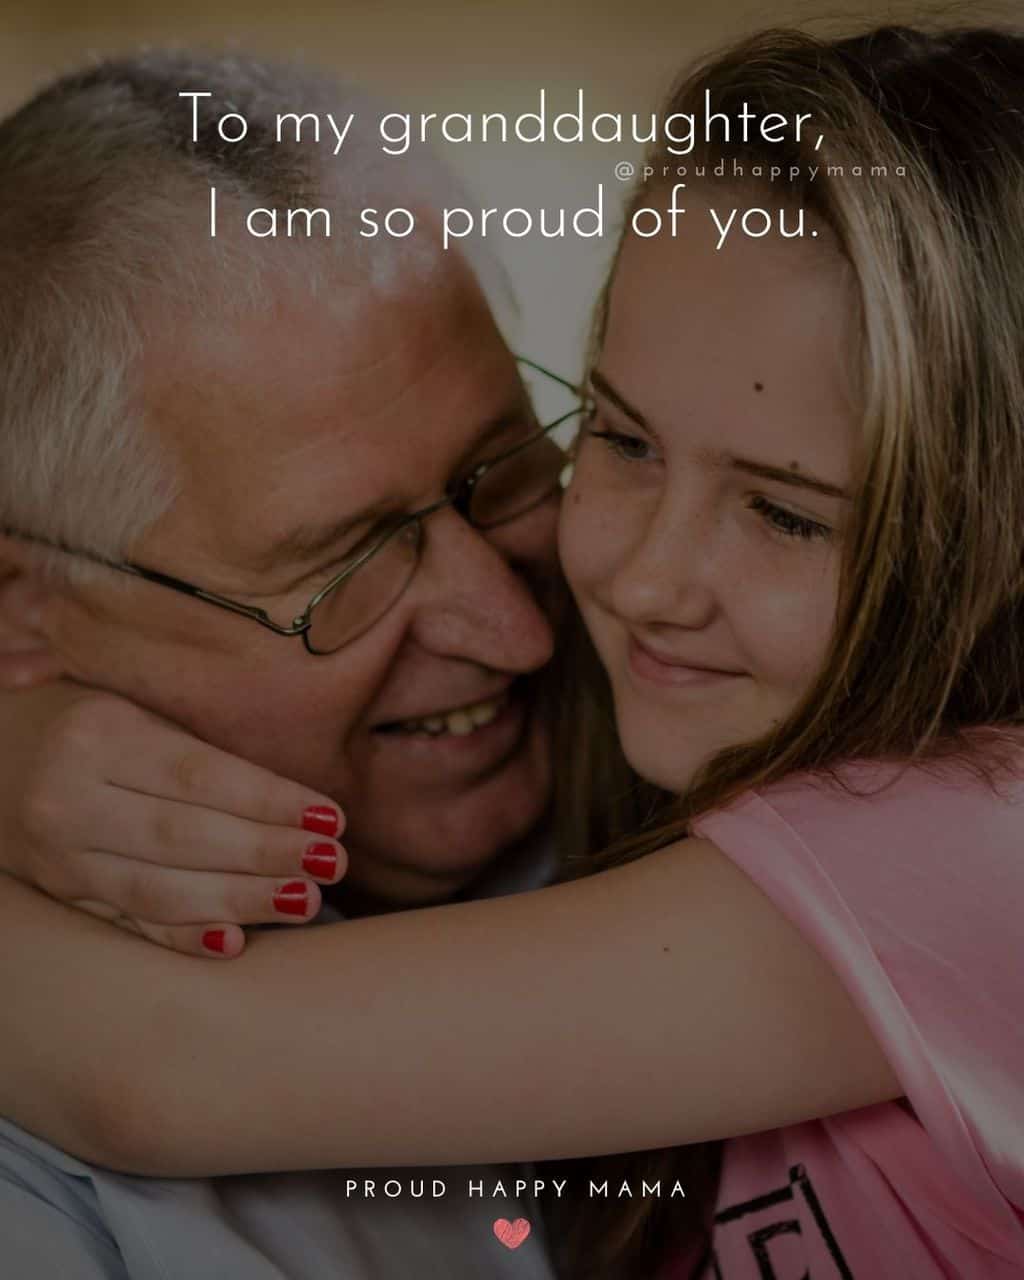 Granddaughter Quotes - To my granddaughter, I am so proud of you.’